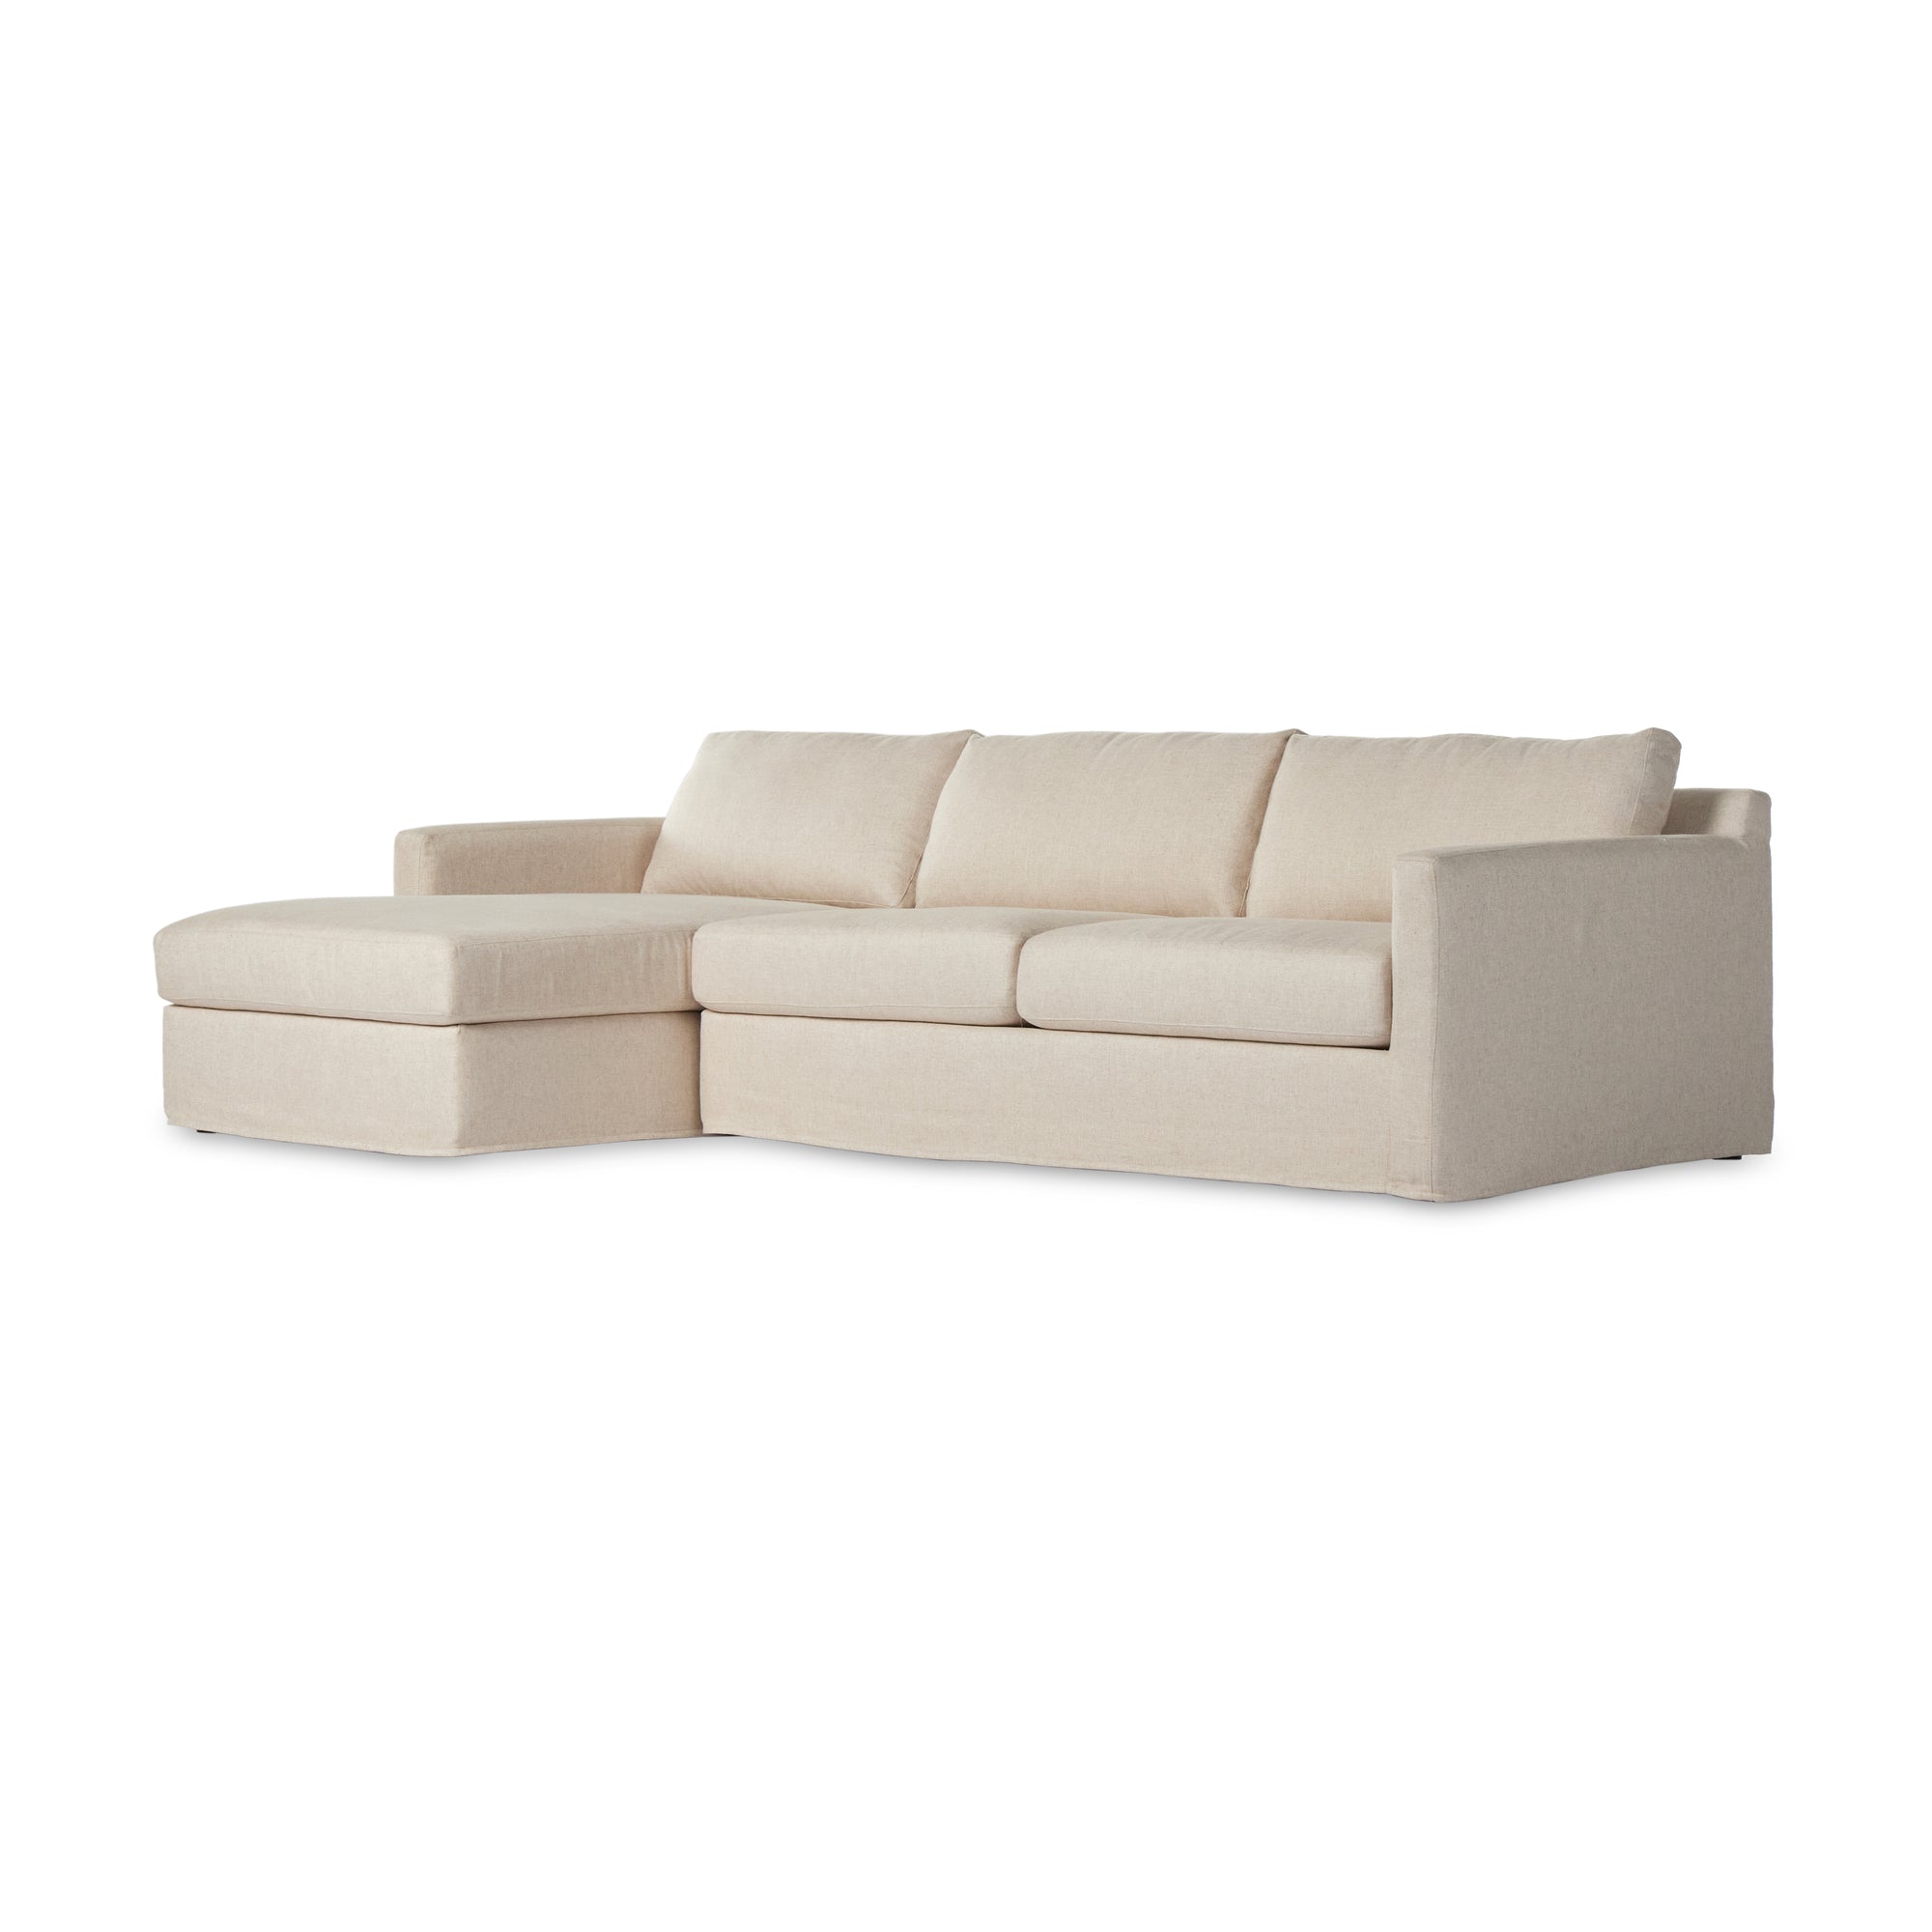 Margo 2-piece Slipcover Sectional